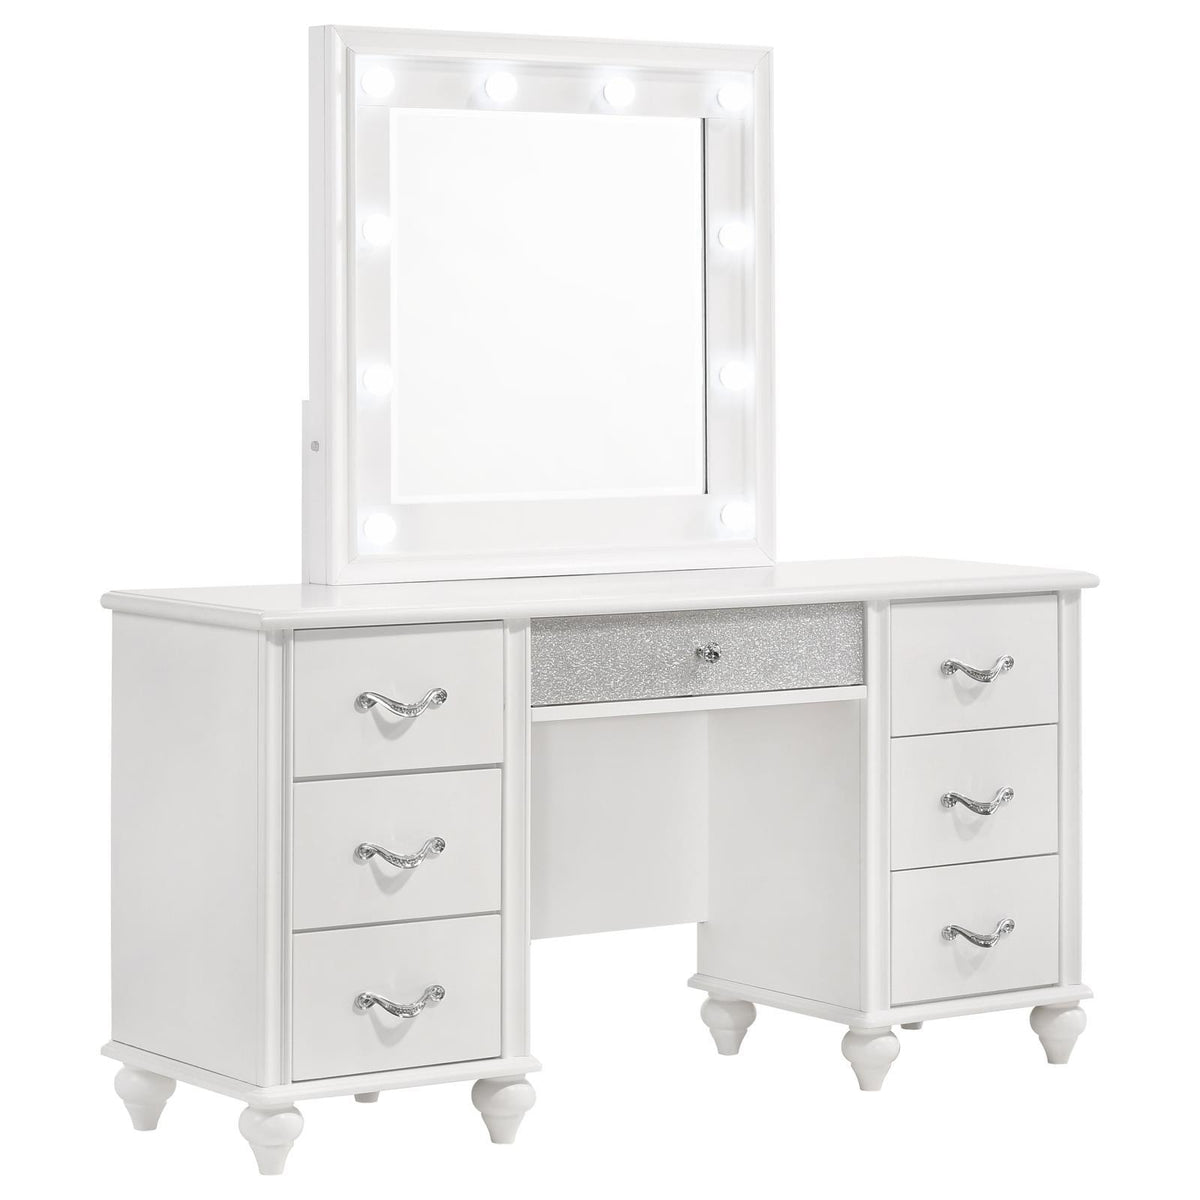 Barzini 7 Drawer Vanity Desk With Lighted Mirror White - Las Vegas Furniture Stores